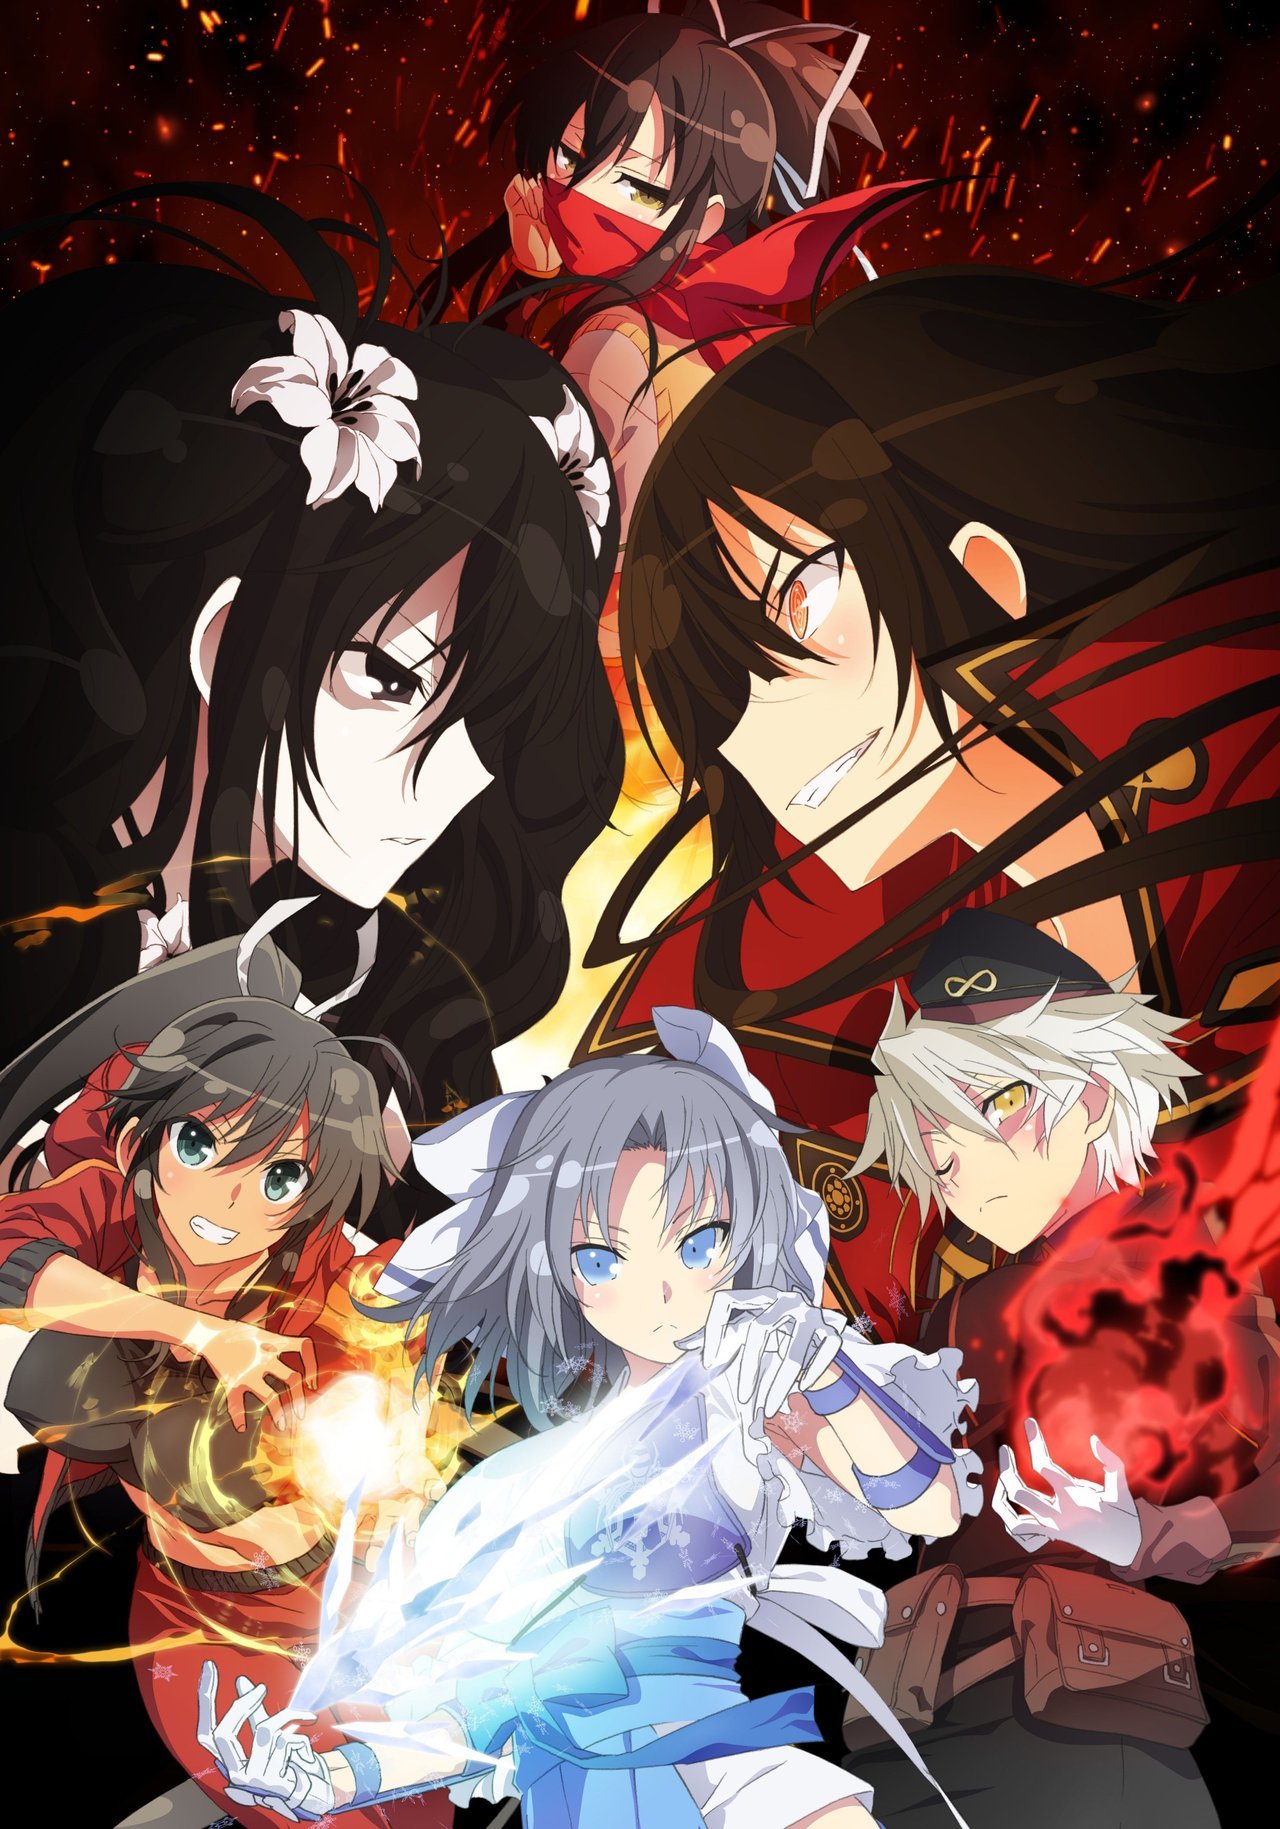 A new key visual for the âSenran Kagura: Shinovi Masterâ S2 TV anime has been unveiled. Series begins October 12th. -Staff-â¢ Director: Tetsuya Yanagisawa â¢ Series Composition: Yukinori Kitajima â¢ Character Design: Gotou Junji â¢ Music: NoisyCroak â¢...